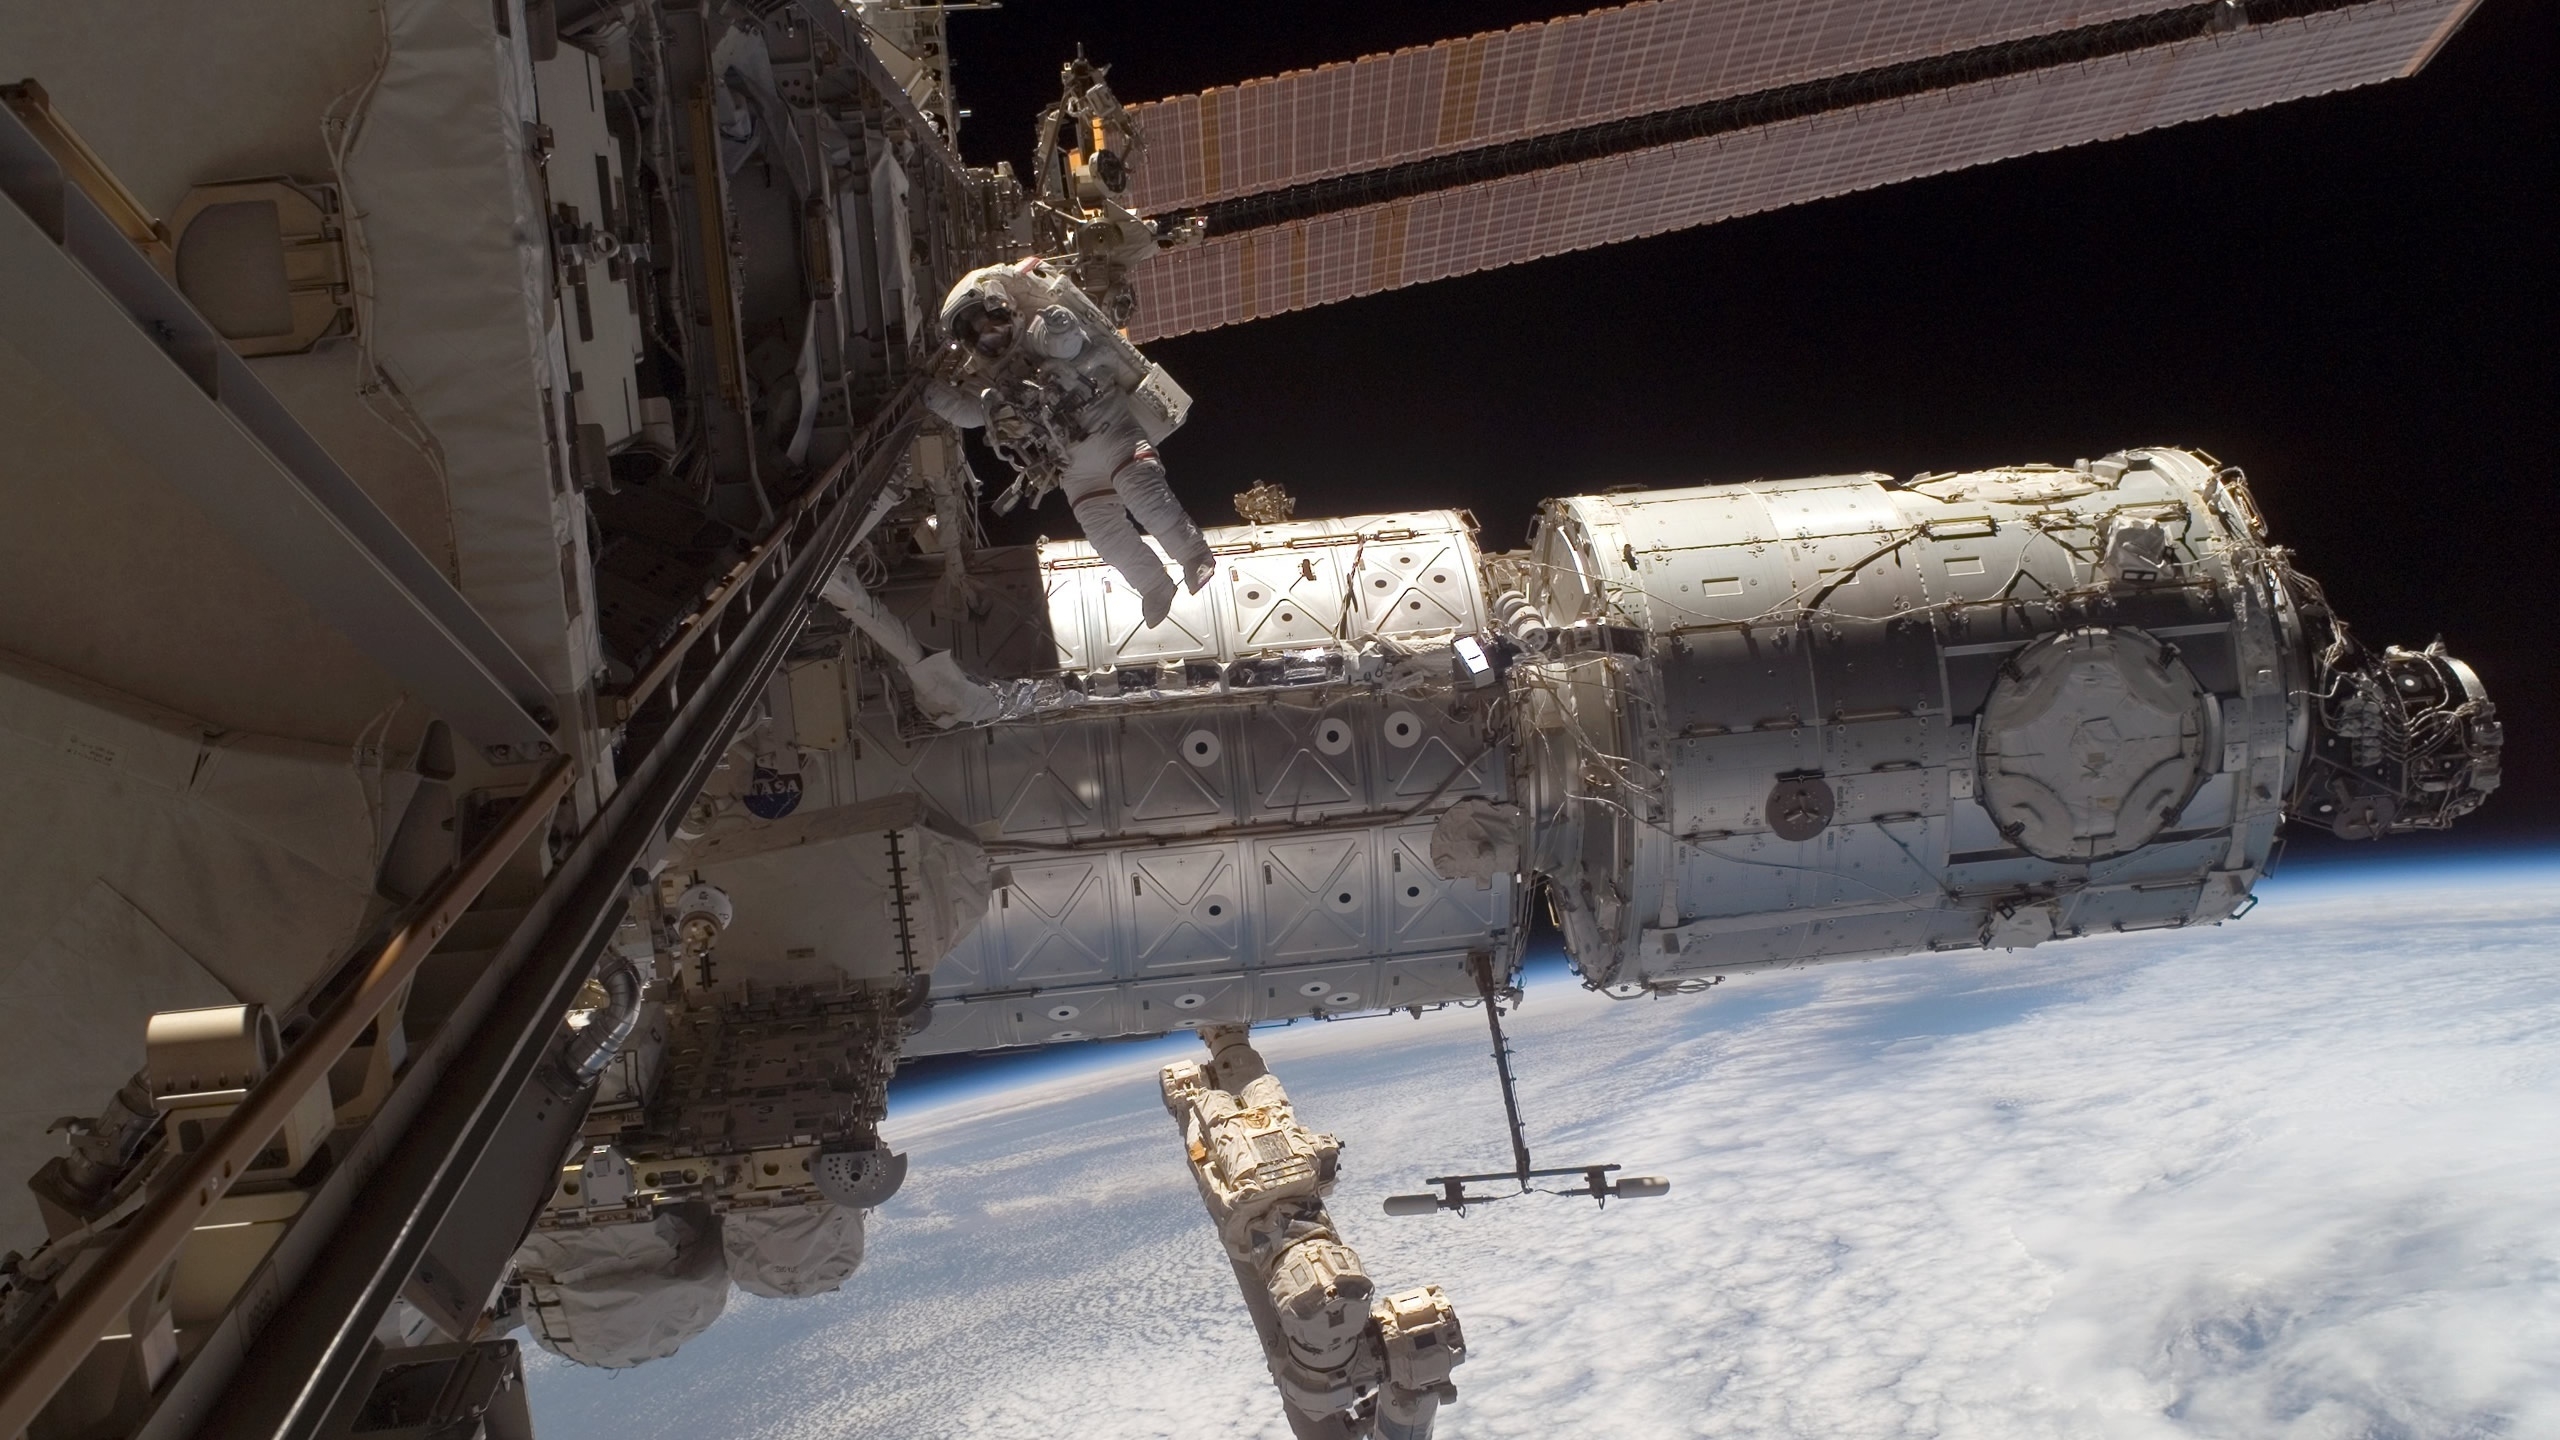 Man on Space Station for 2560x1440 HDTV resolution